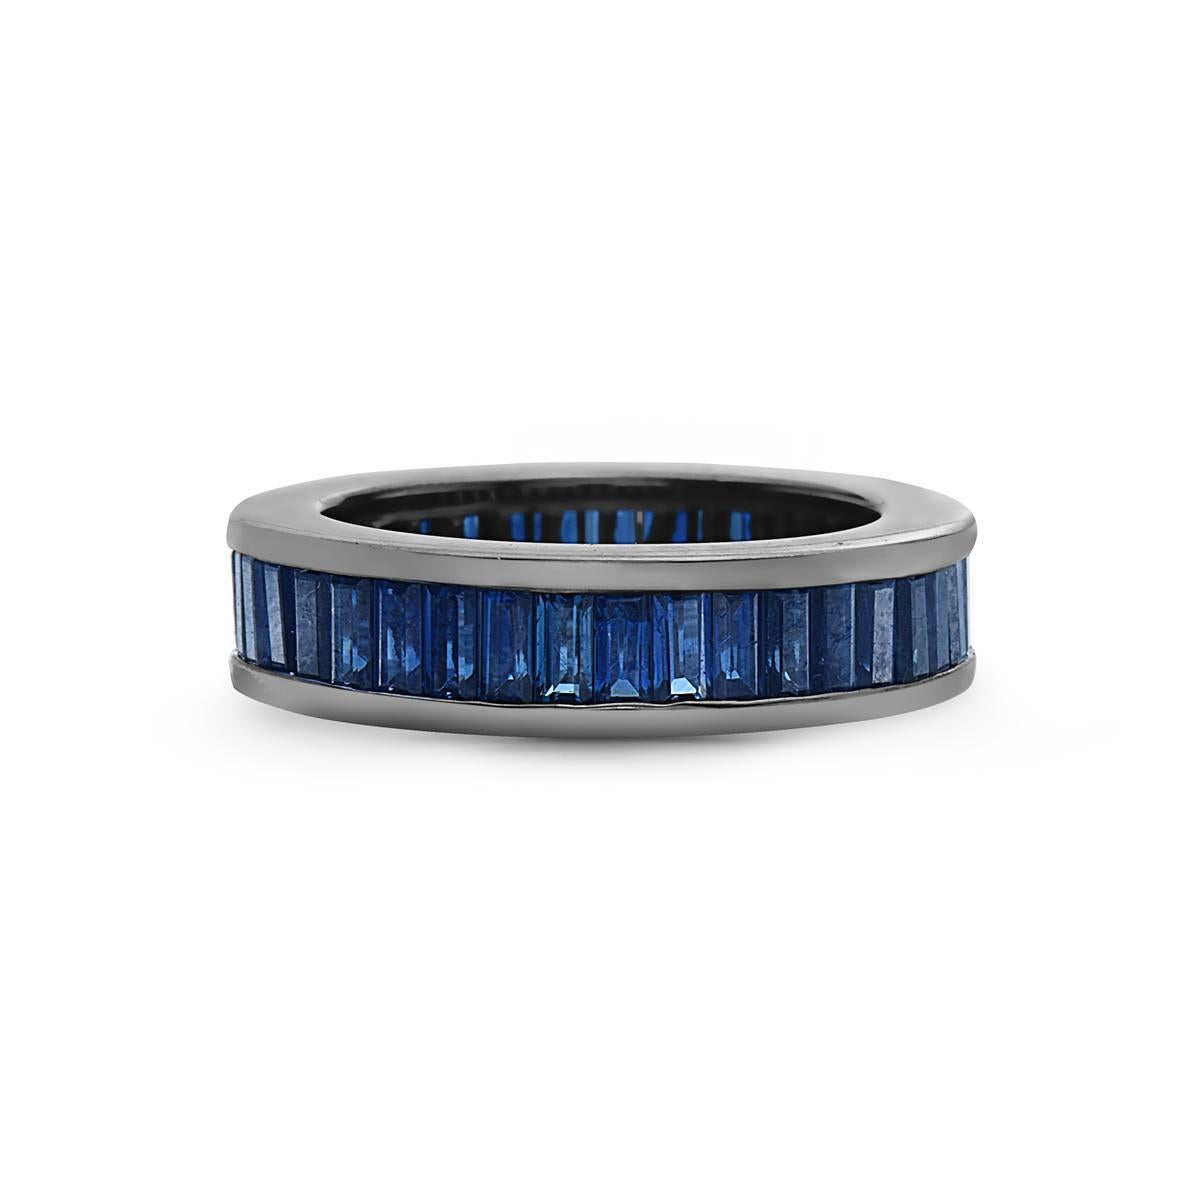 This eternity band ring features 40 baguette cut sapphires weighing 4.30 carats set in 14K gold dipped in rhodium. 6.1 grams total weight. Size 6.